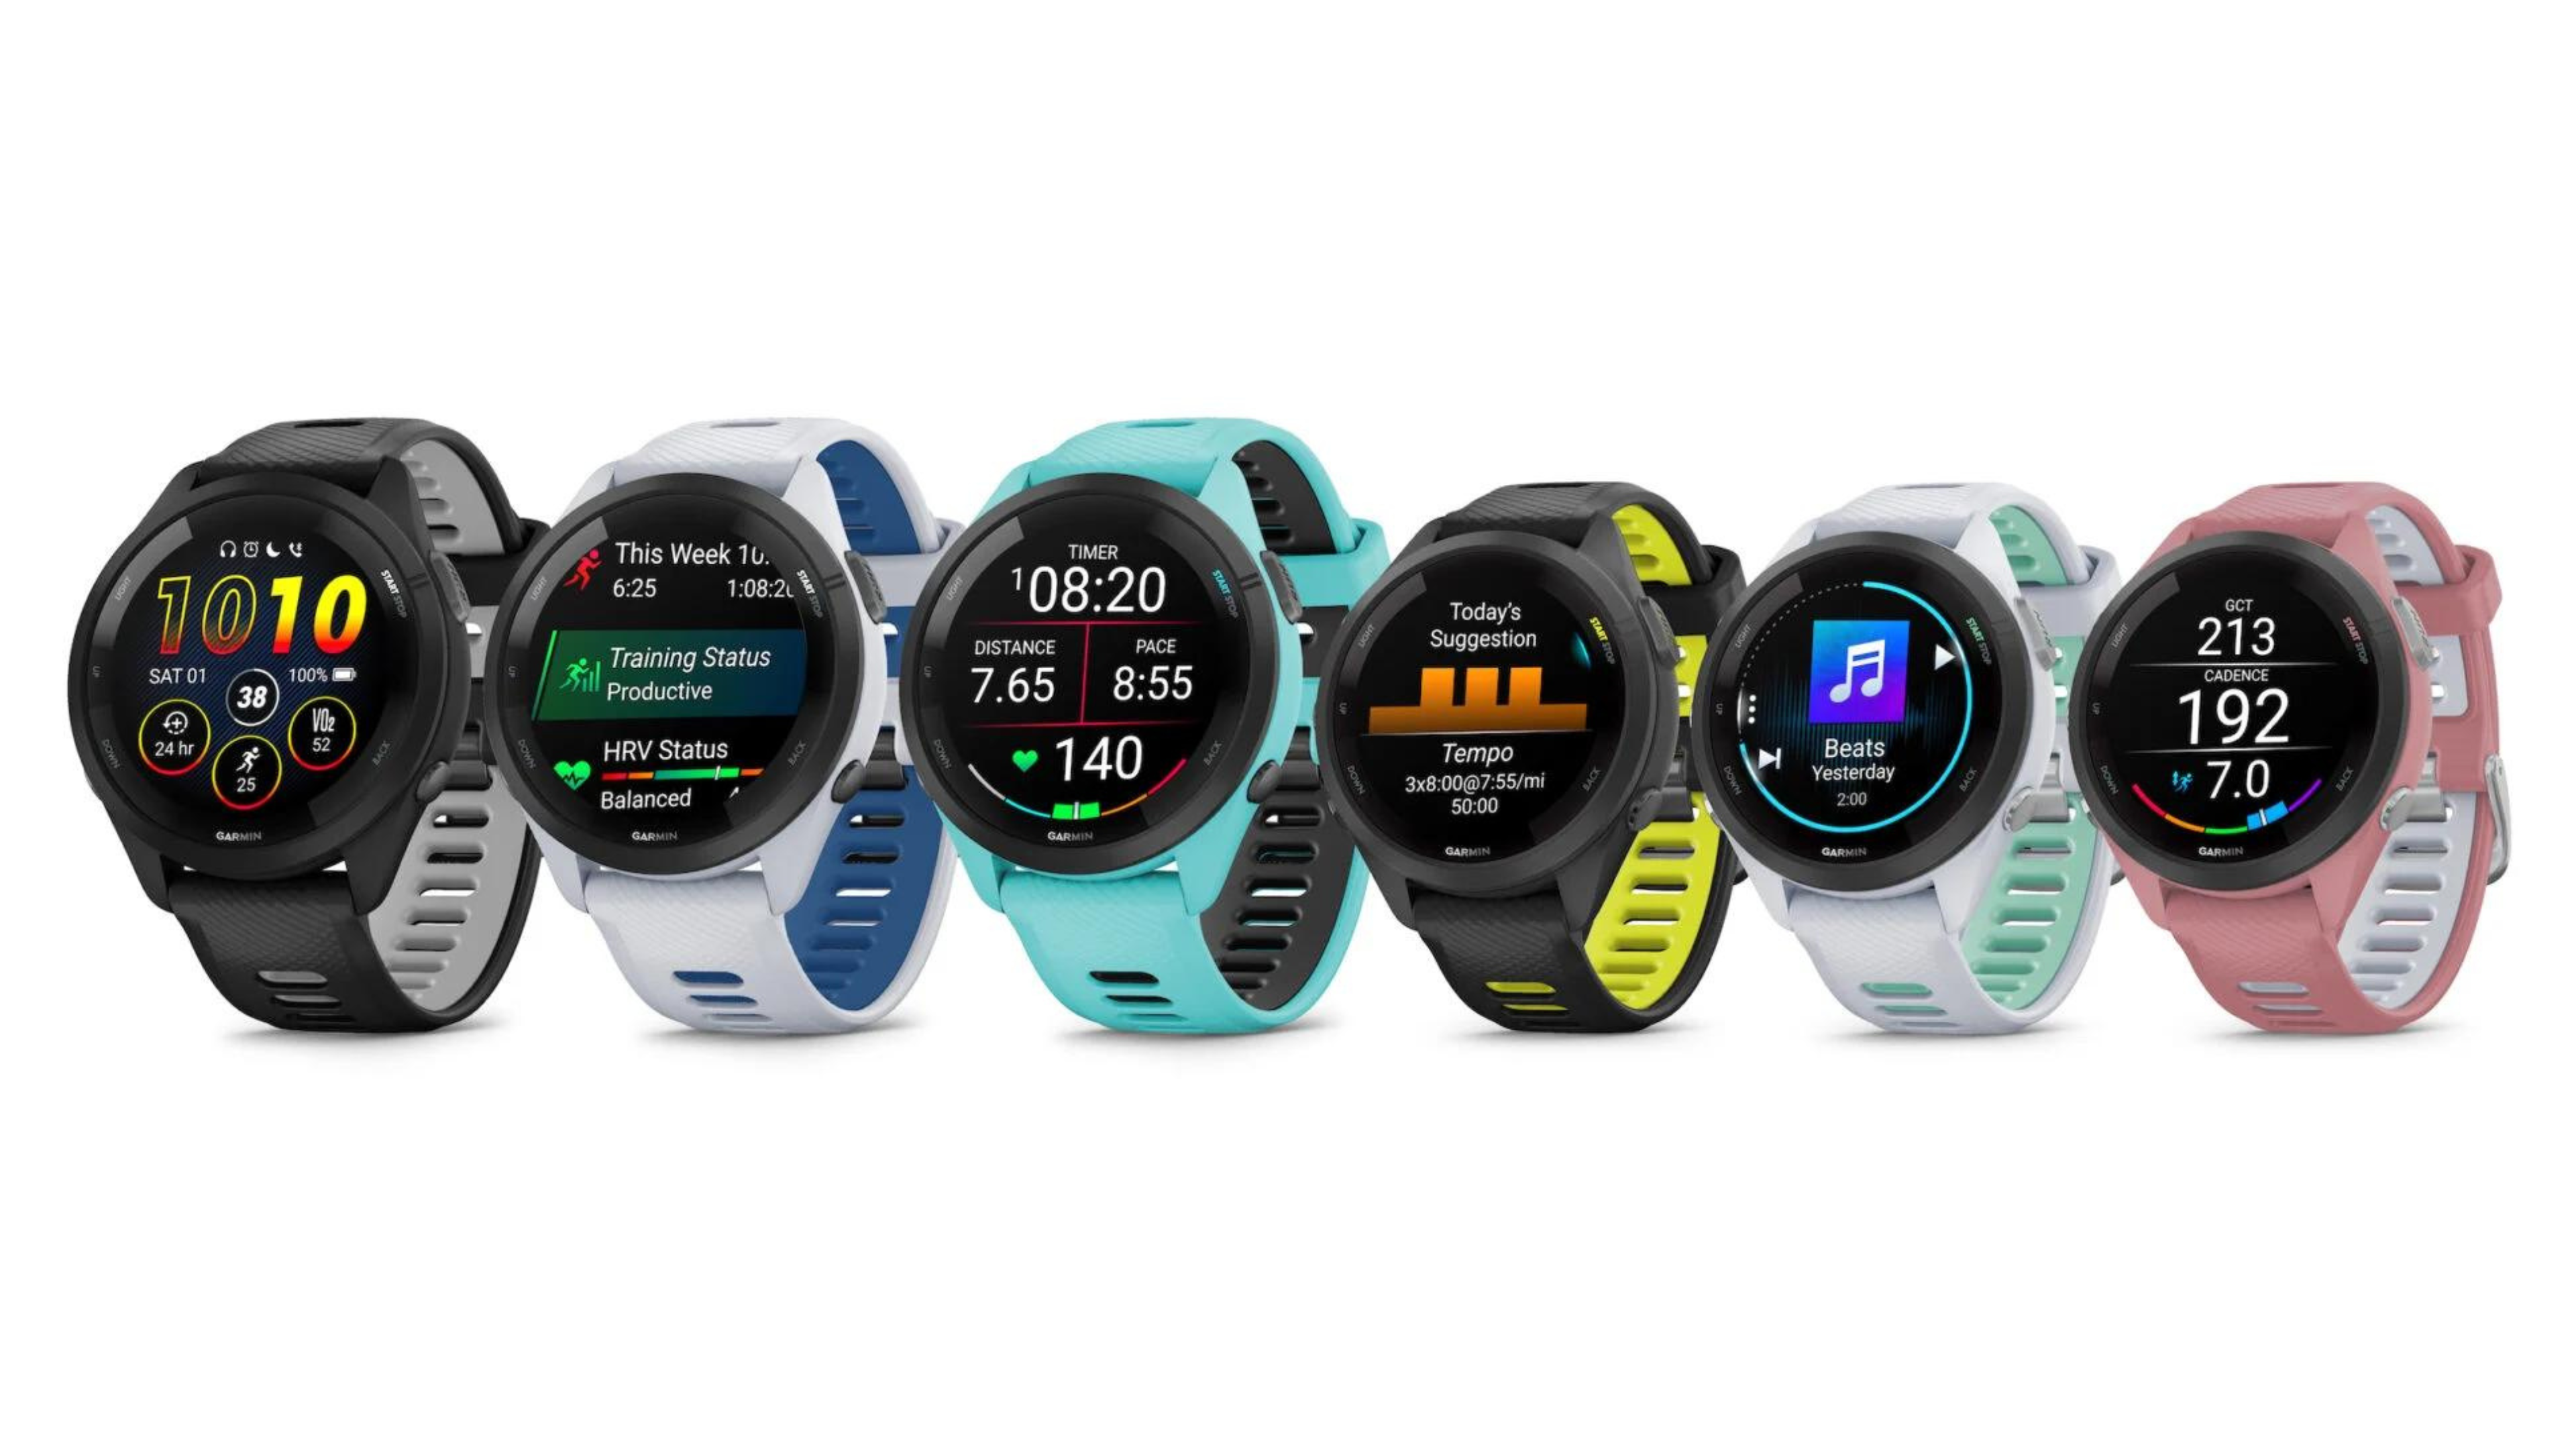 Garmin Forerunner 965 and Forerunner 265 watches come in all sorts of colors